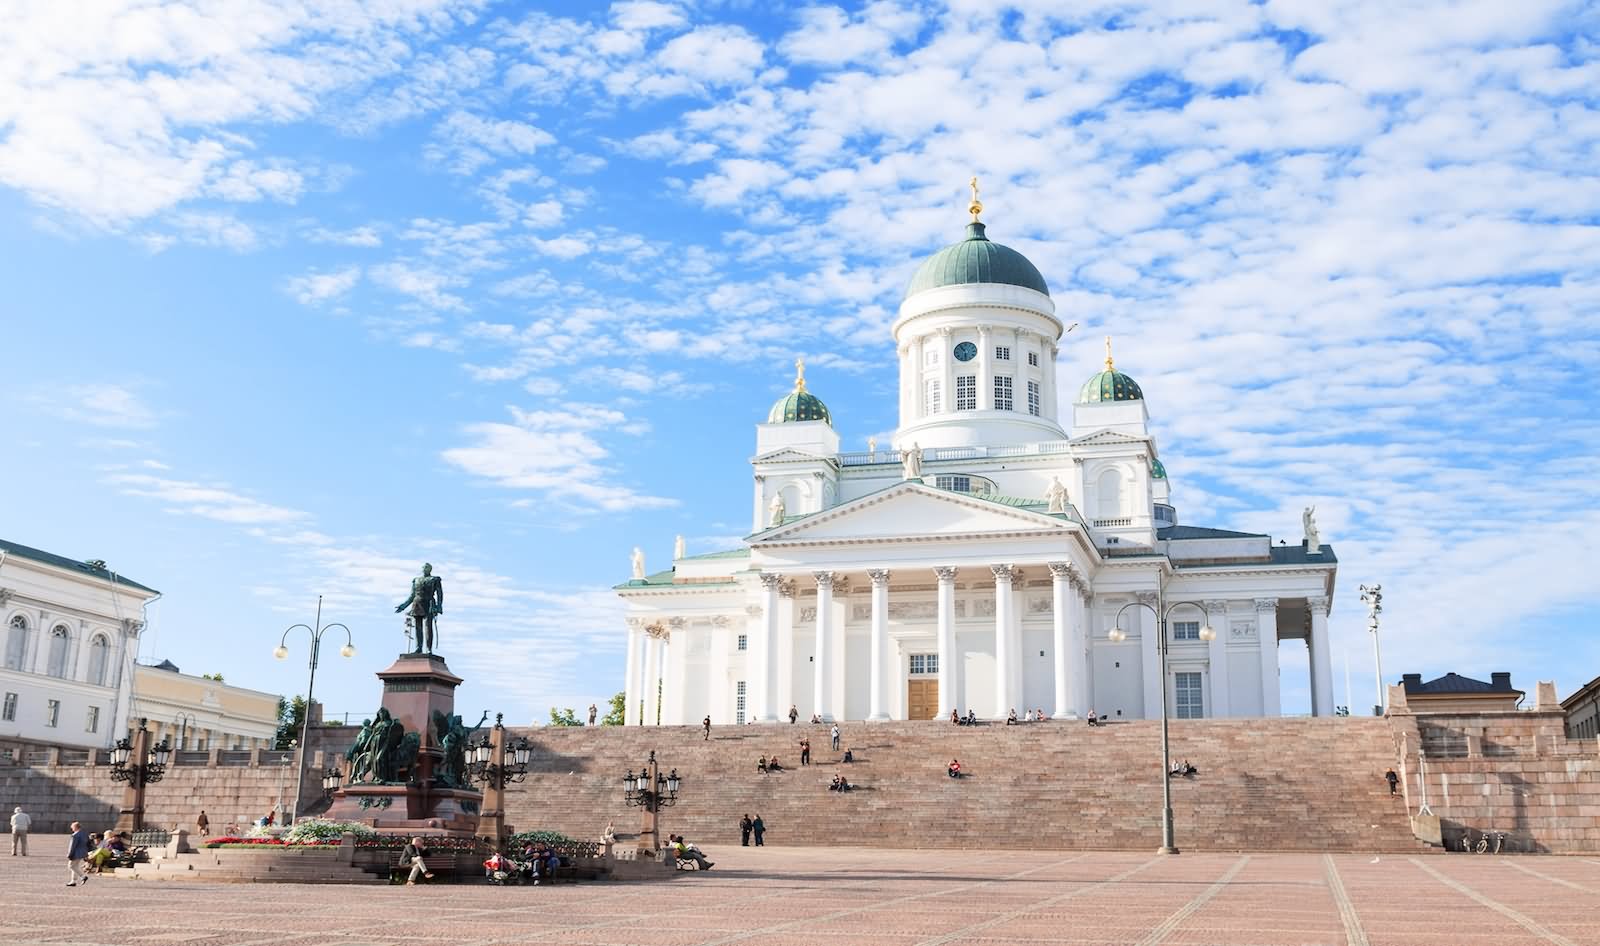 Beautiful Photo Of The Helsinki Cathedral In Finland